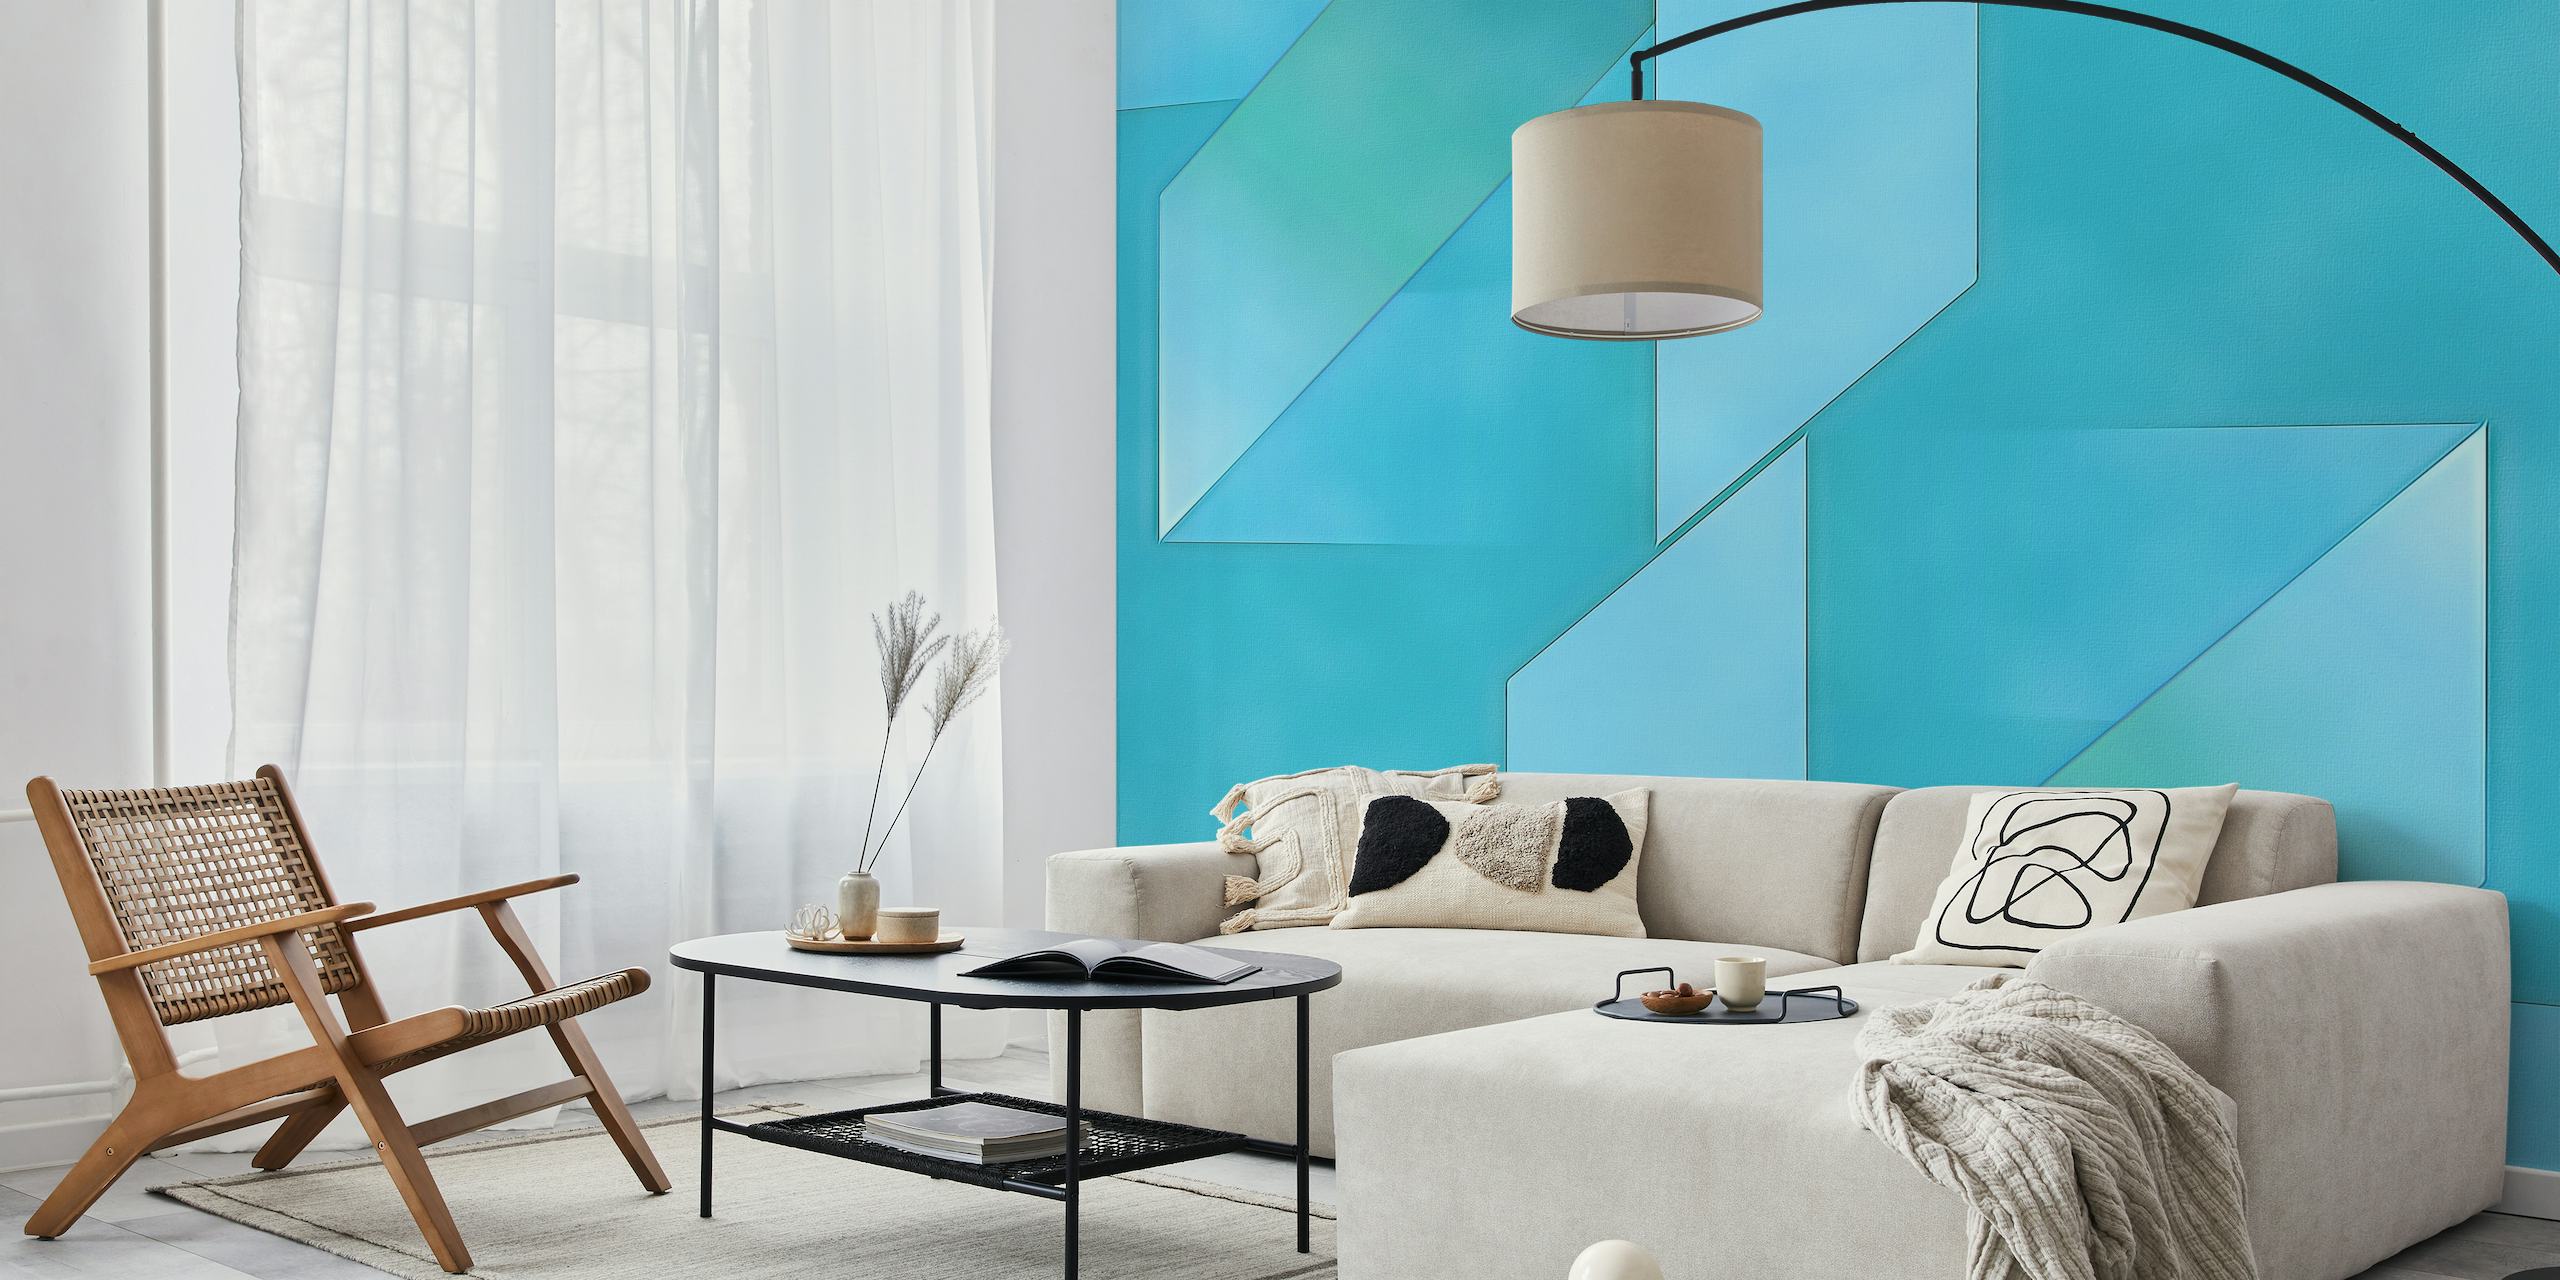 Abstract geometric mint-colored shapes wall mural